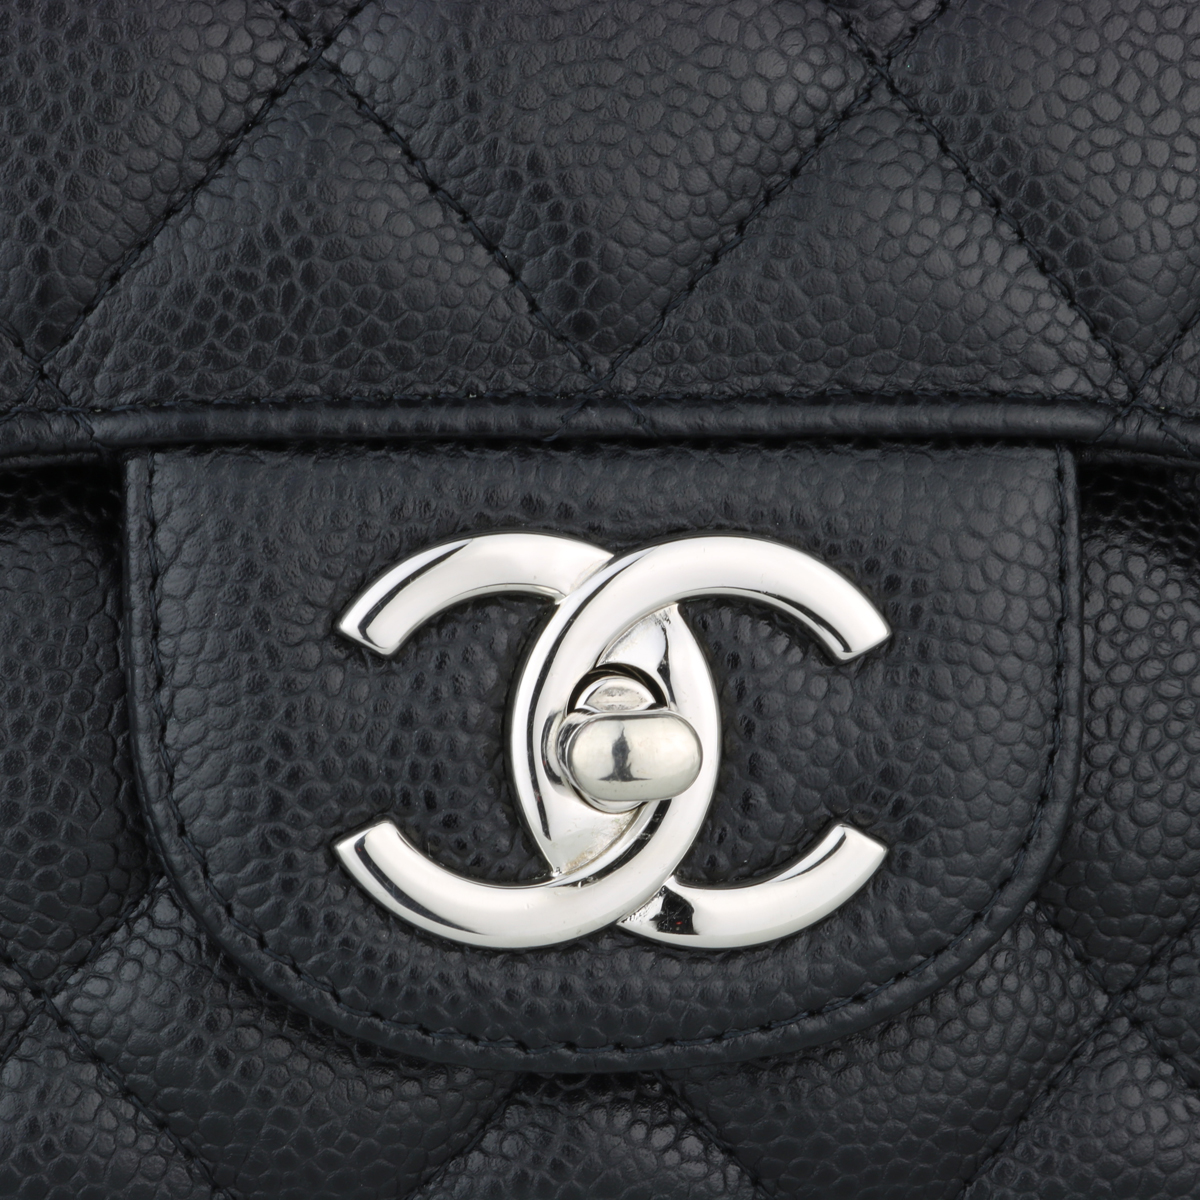 Chanel Classic Quilted Caviar Double Flap Jumbo Bag in Burgundy